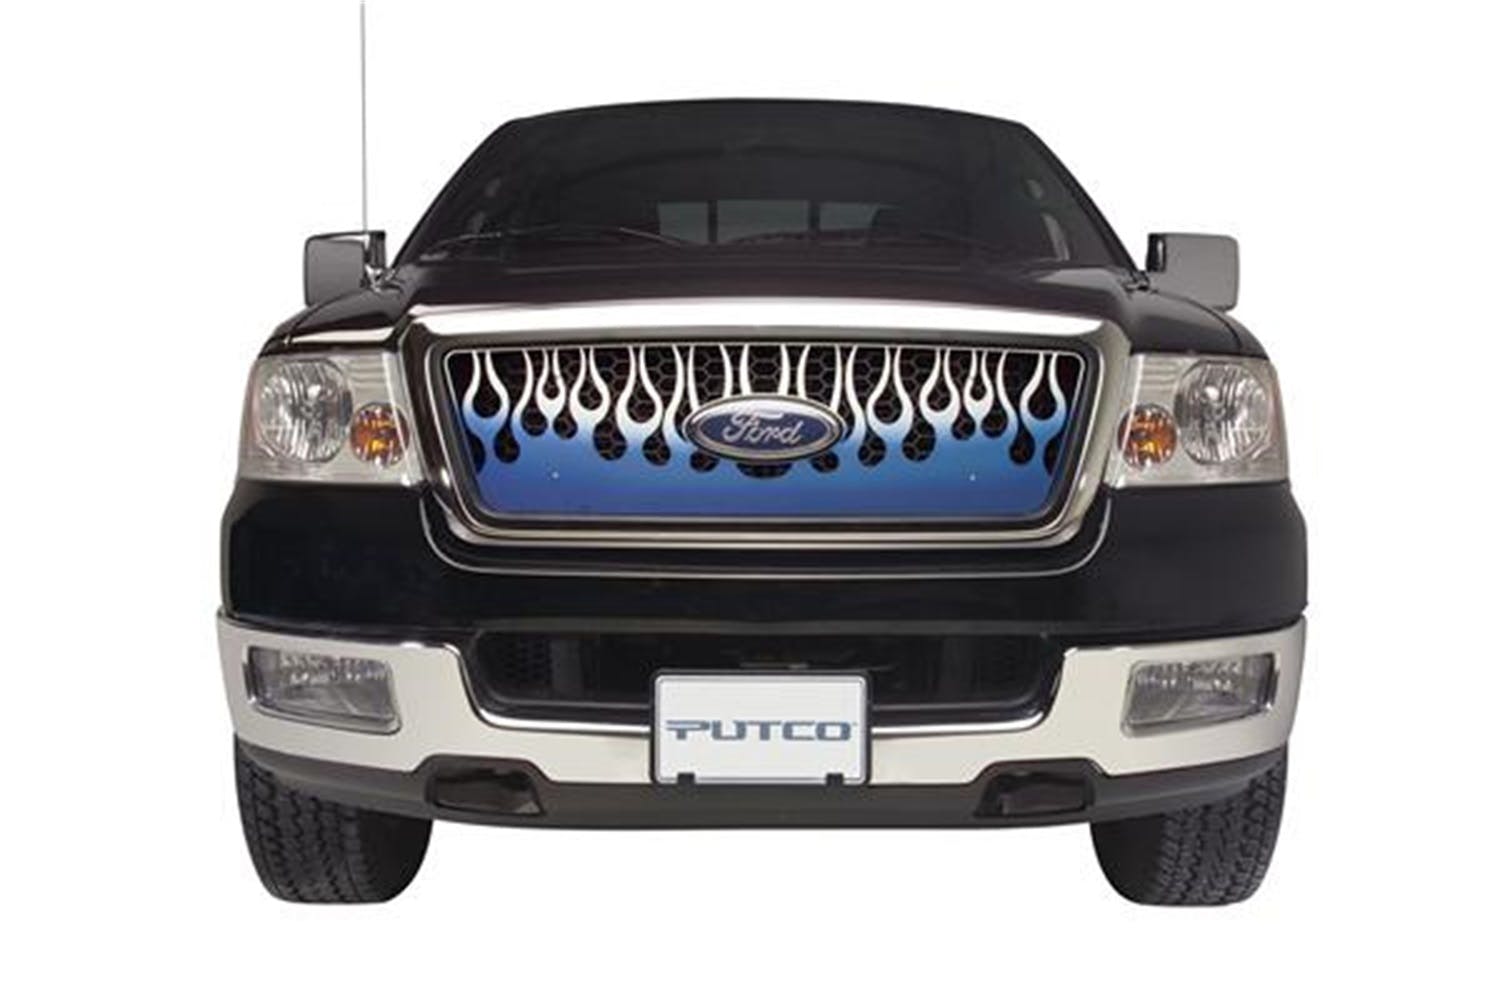 Putco 89496 Flaming Inferno Stainless Steel Grilles - Blue (Painted)